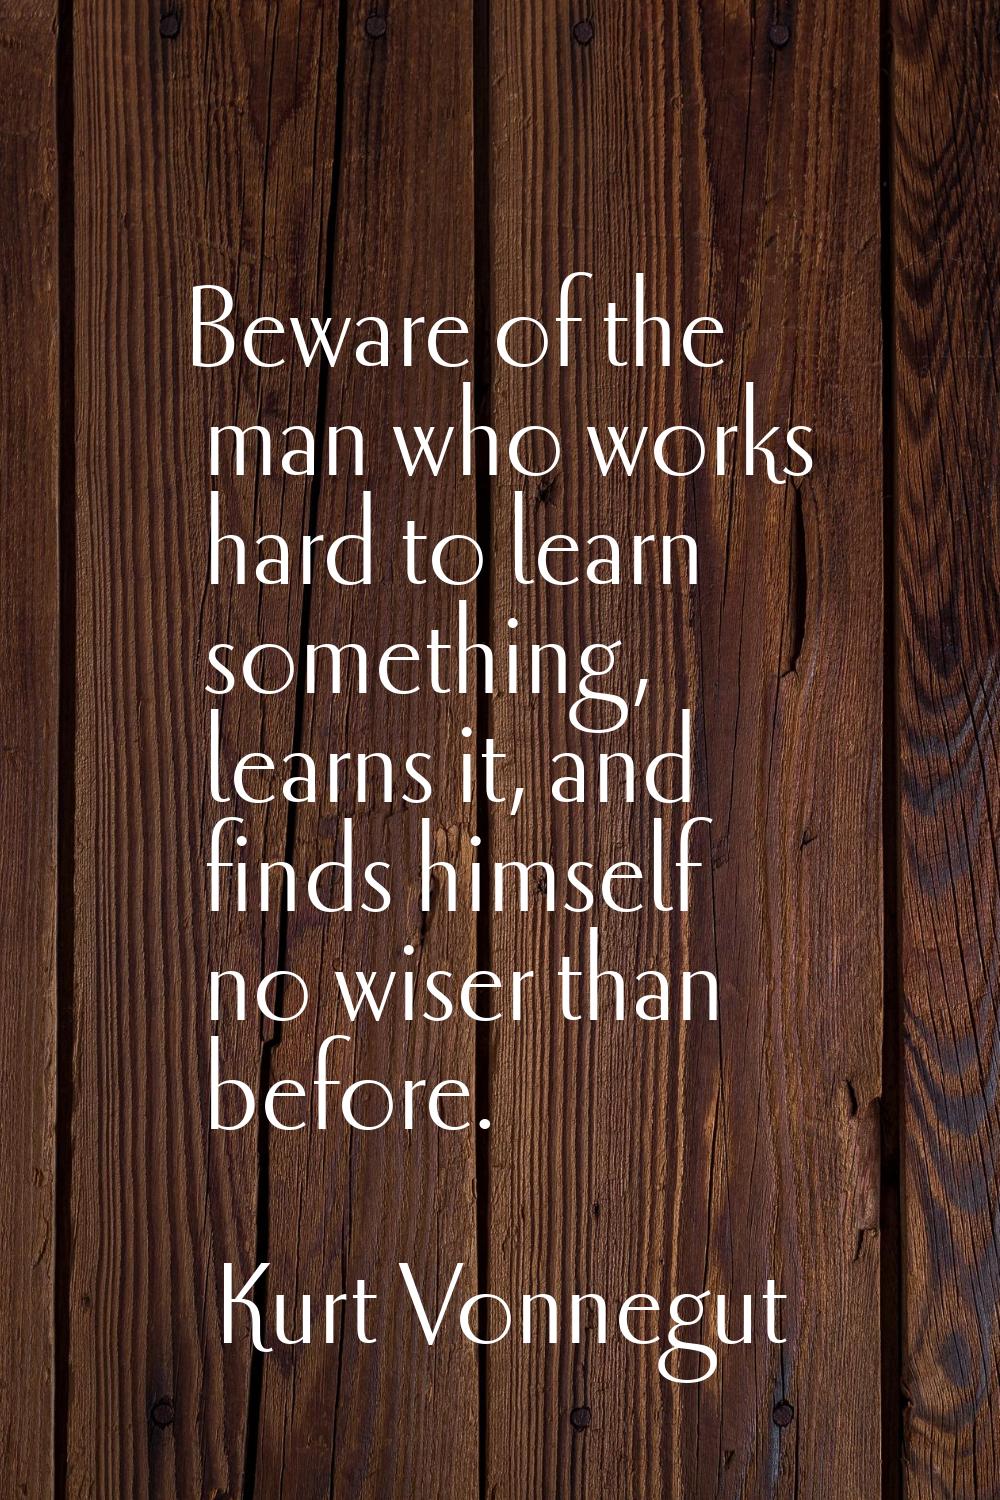 Beware of the man who works hard to learn something, learns it, and finds himself no wiser than bef